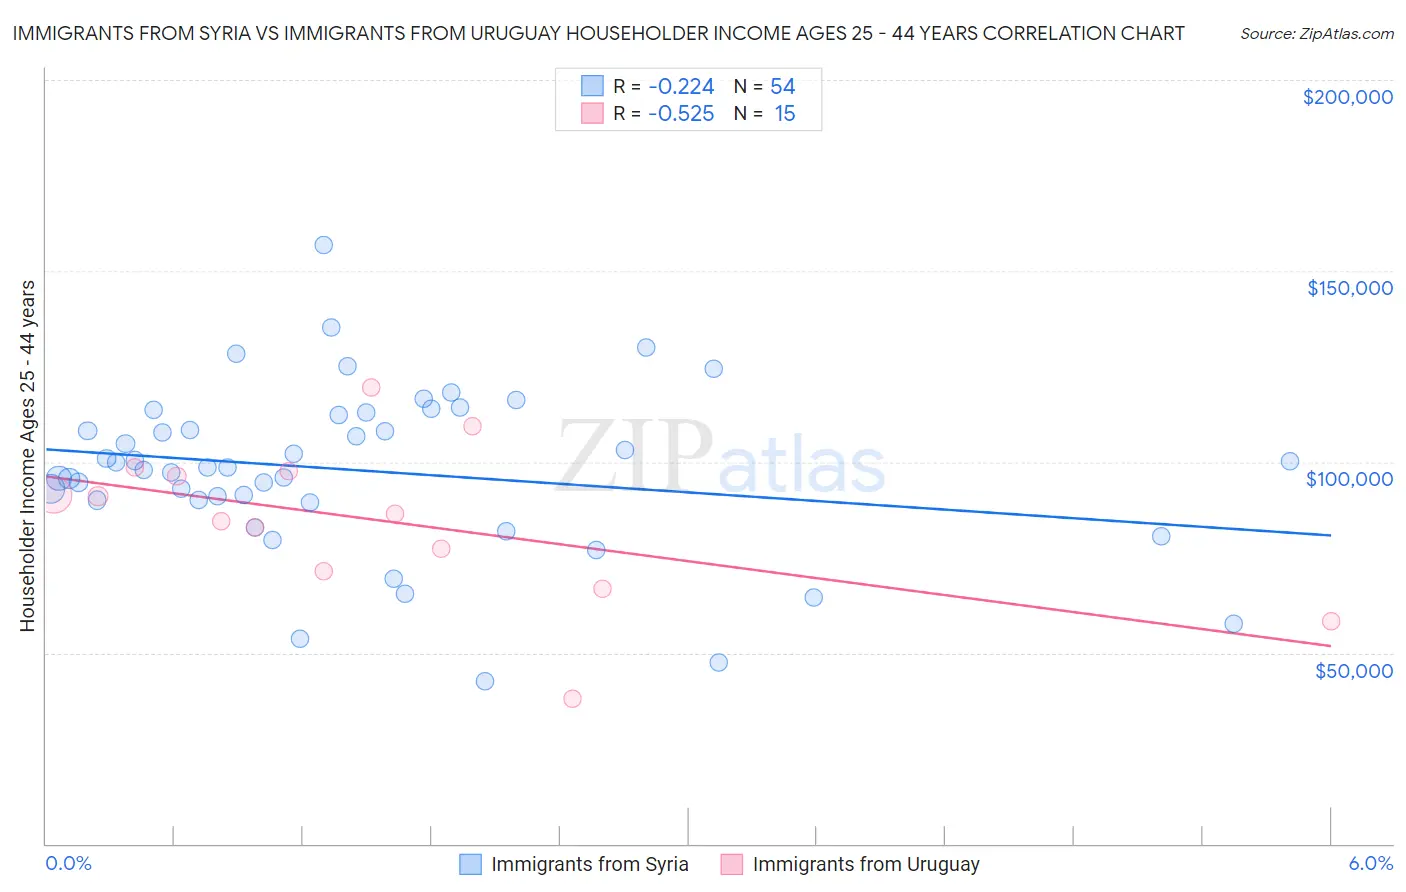 Immigrants from Syria vs Immigrants from Uruguay Householder Income Ages 25 - 44 years